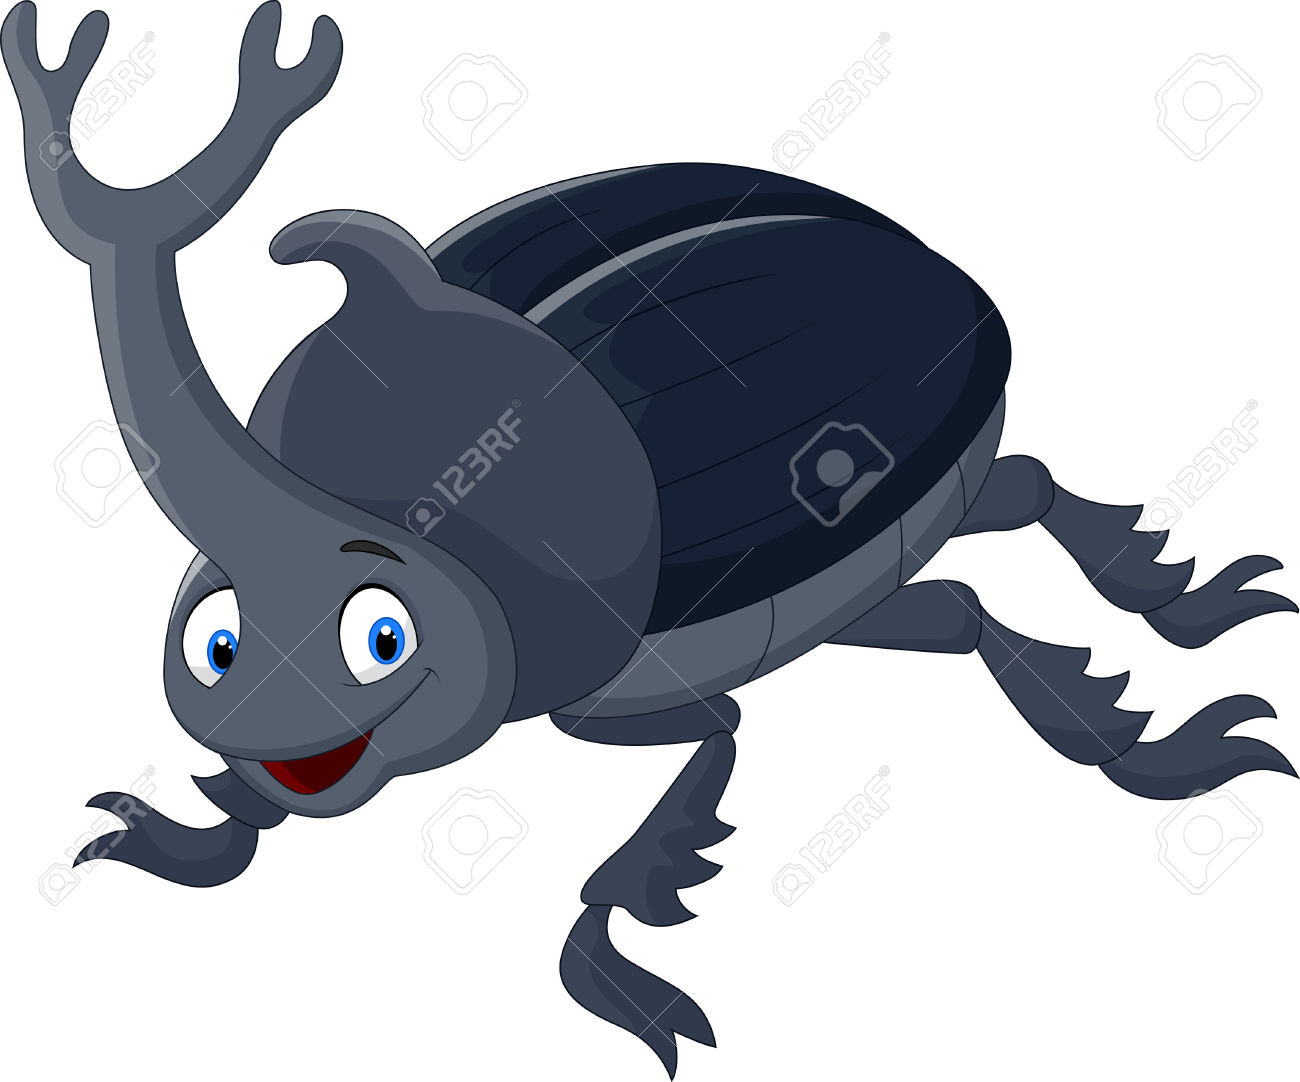 Stag Beetle clipart #15, Download drawings